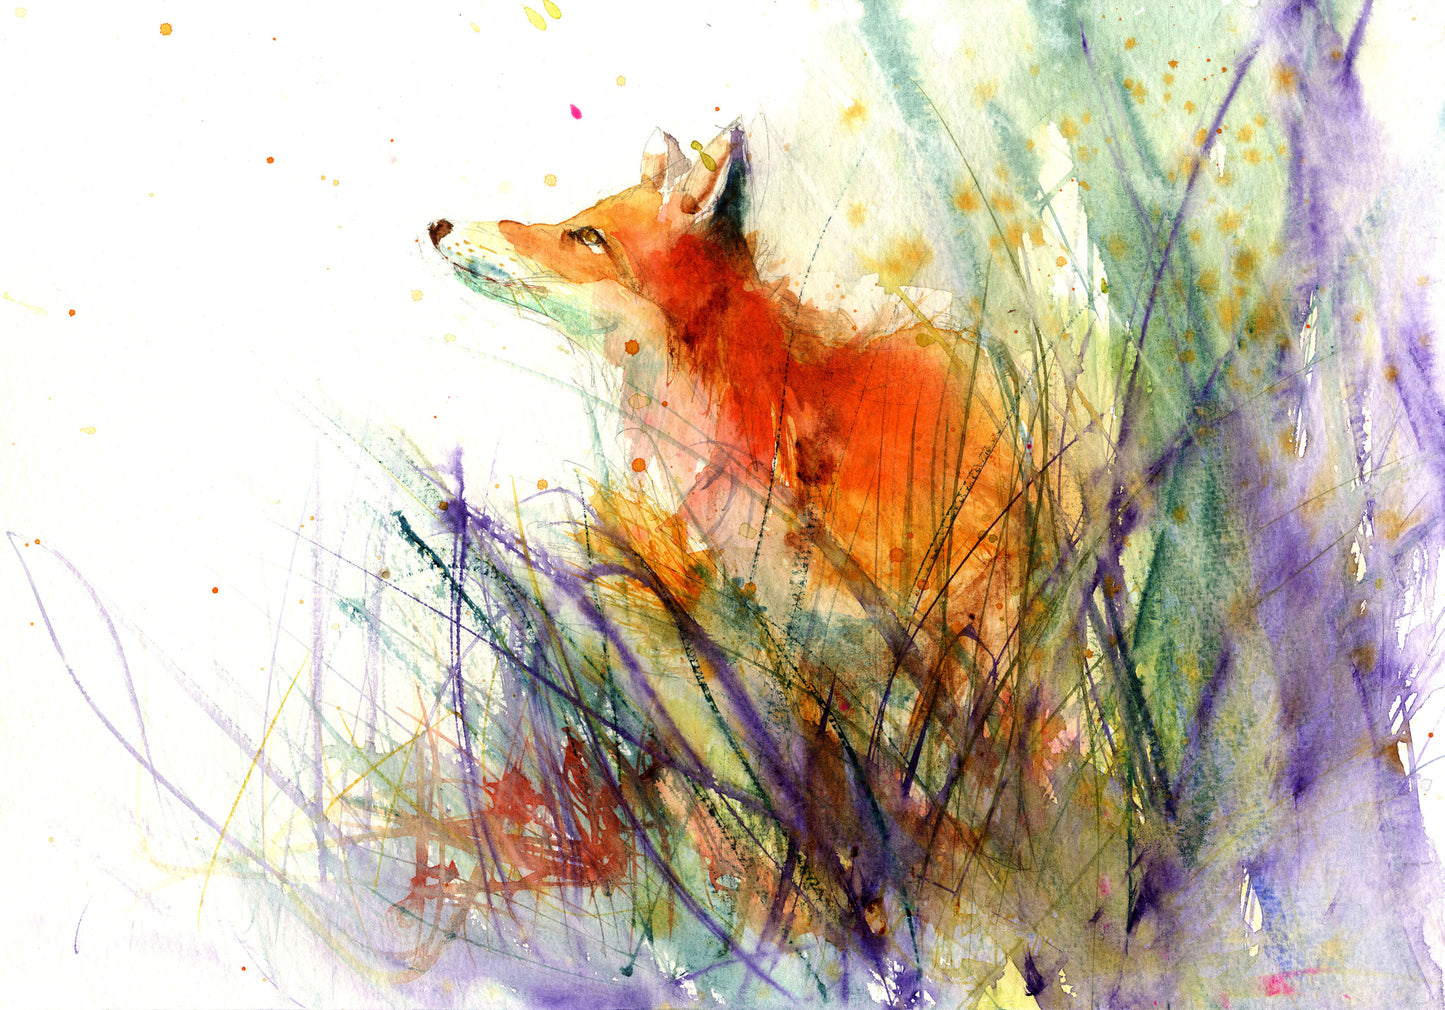 LIMITED EDITON PRINT 'red fox in the meadow' - Jen Buckley Art limited edition animal art prints